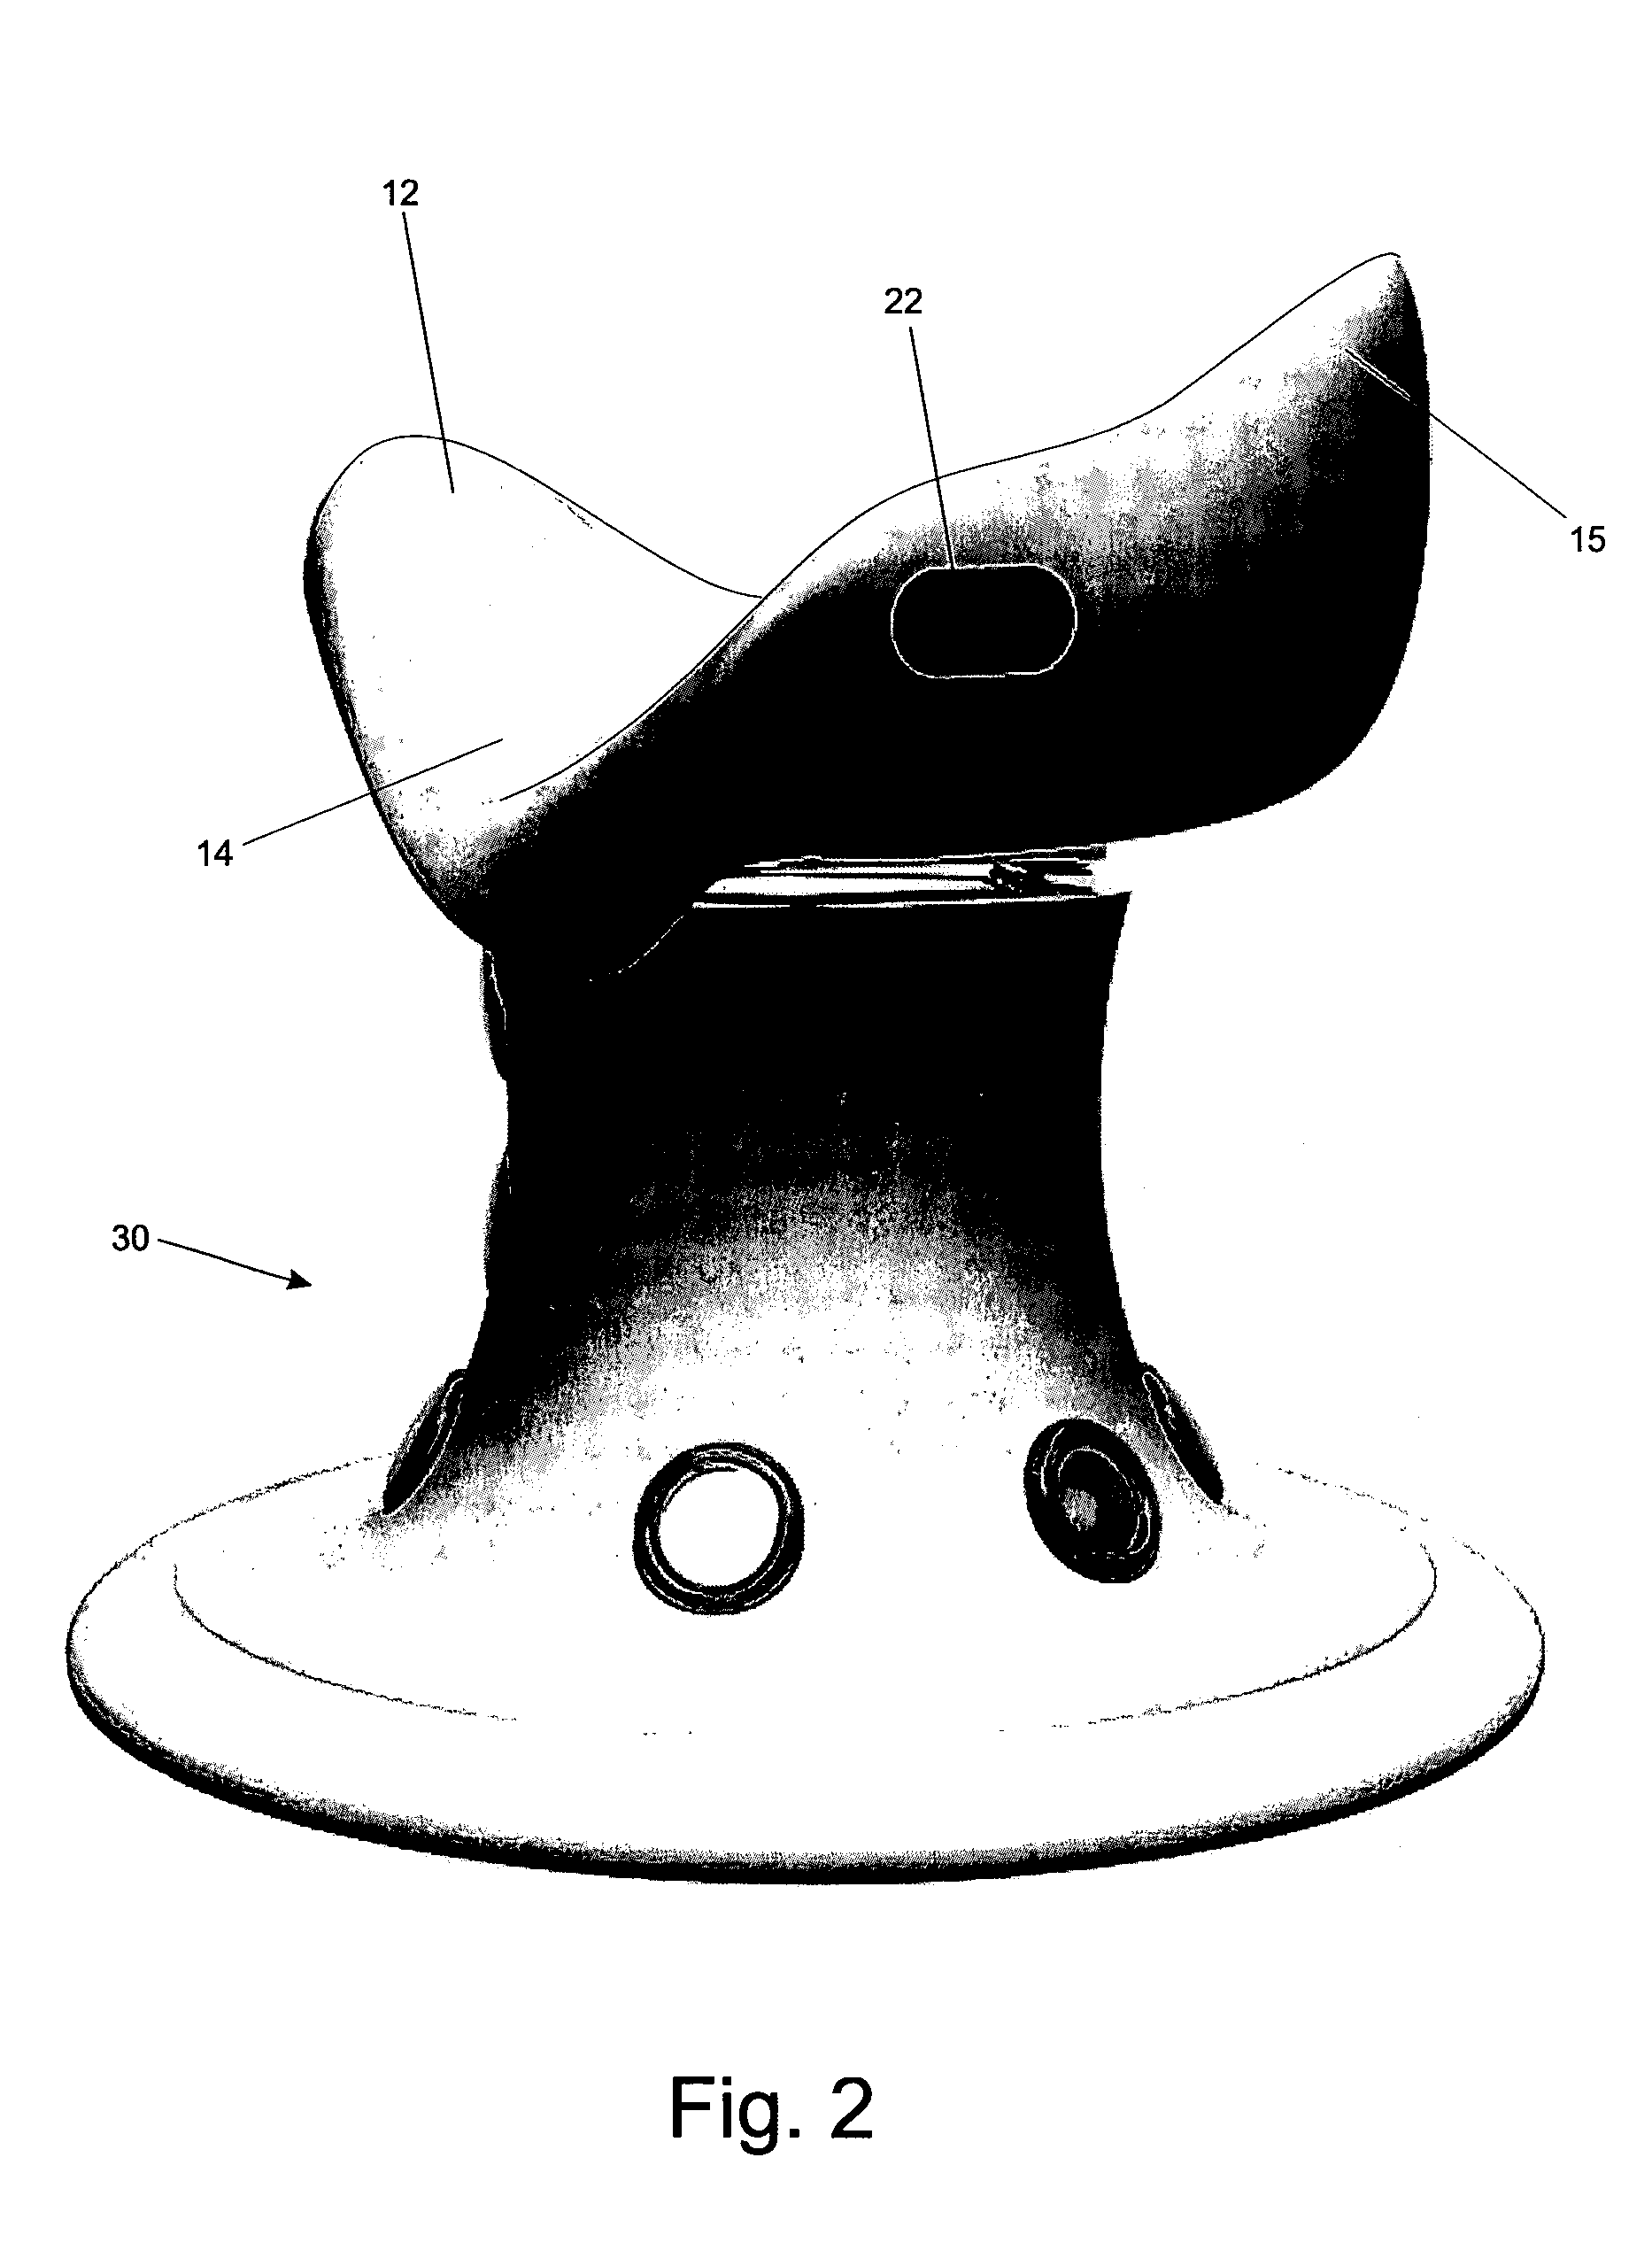 Entertainment apparatus for a seated user